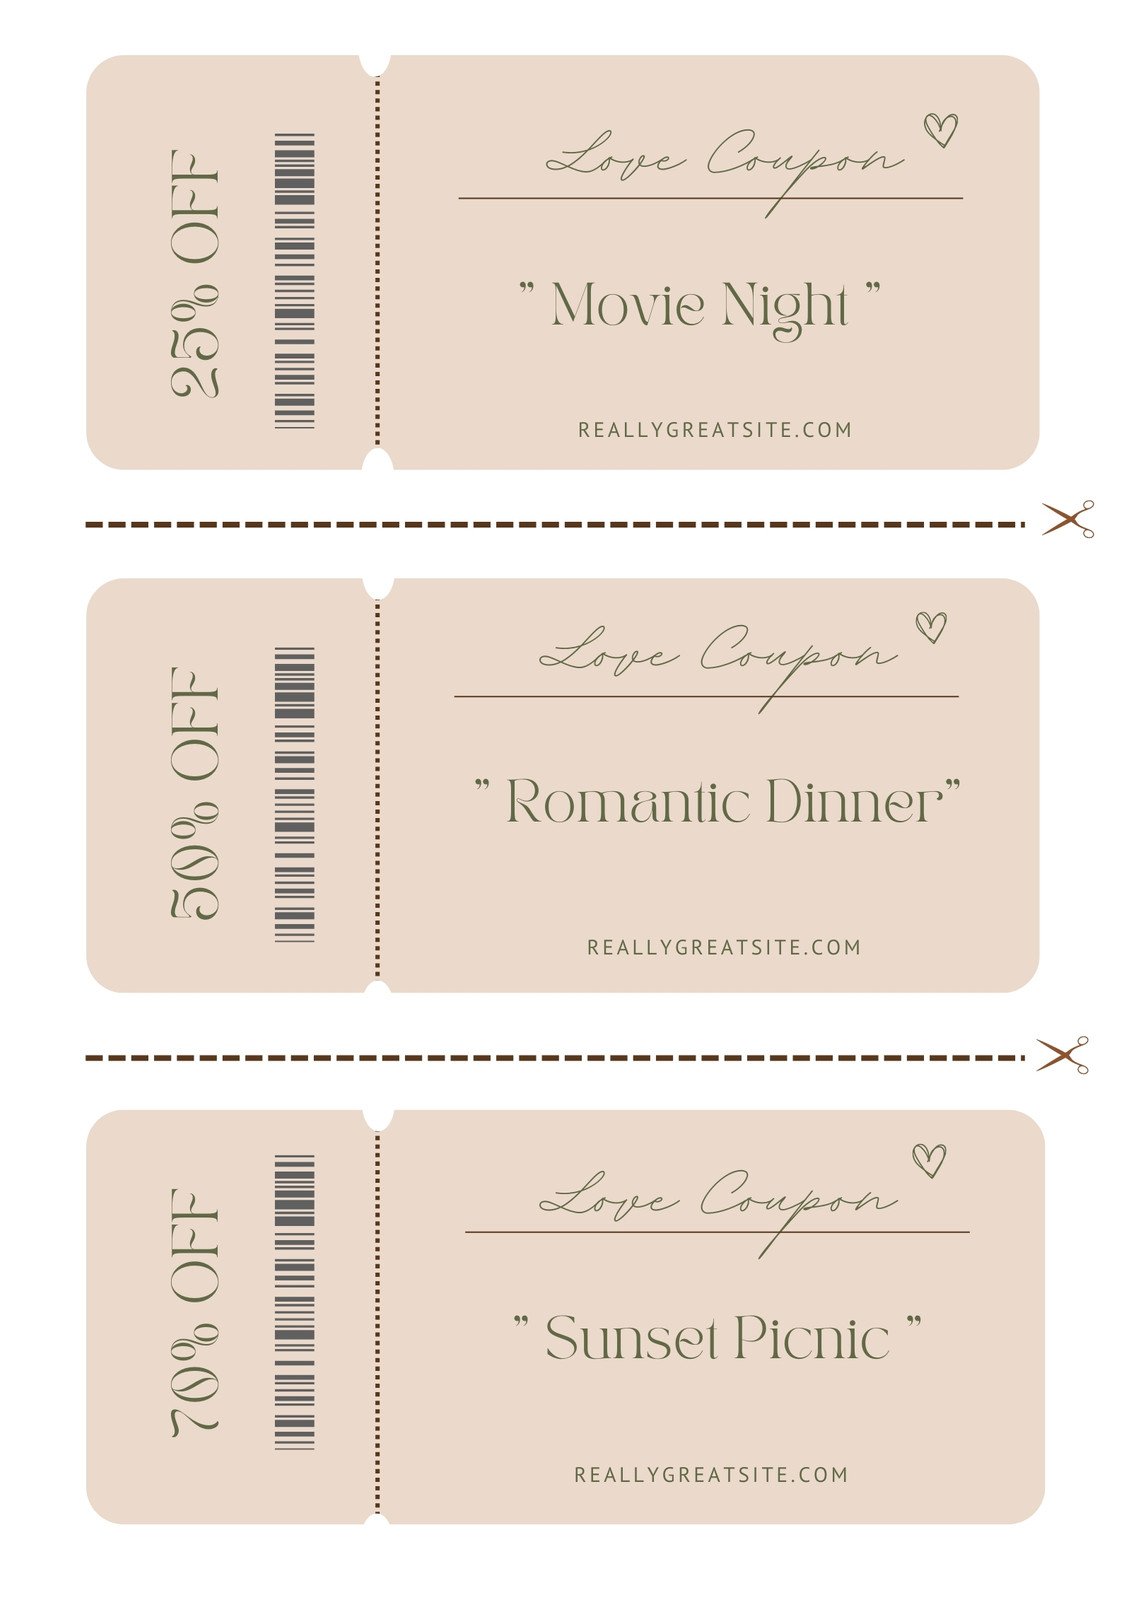 Printable Love Coupons, Printable, Wedding, Anniversary Love Coupons, for  Husband, Boyfriend, Sex Love Coupon, Sexy Gift, Girlfriend Coupons 